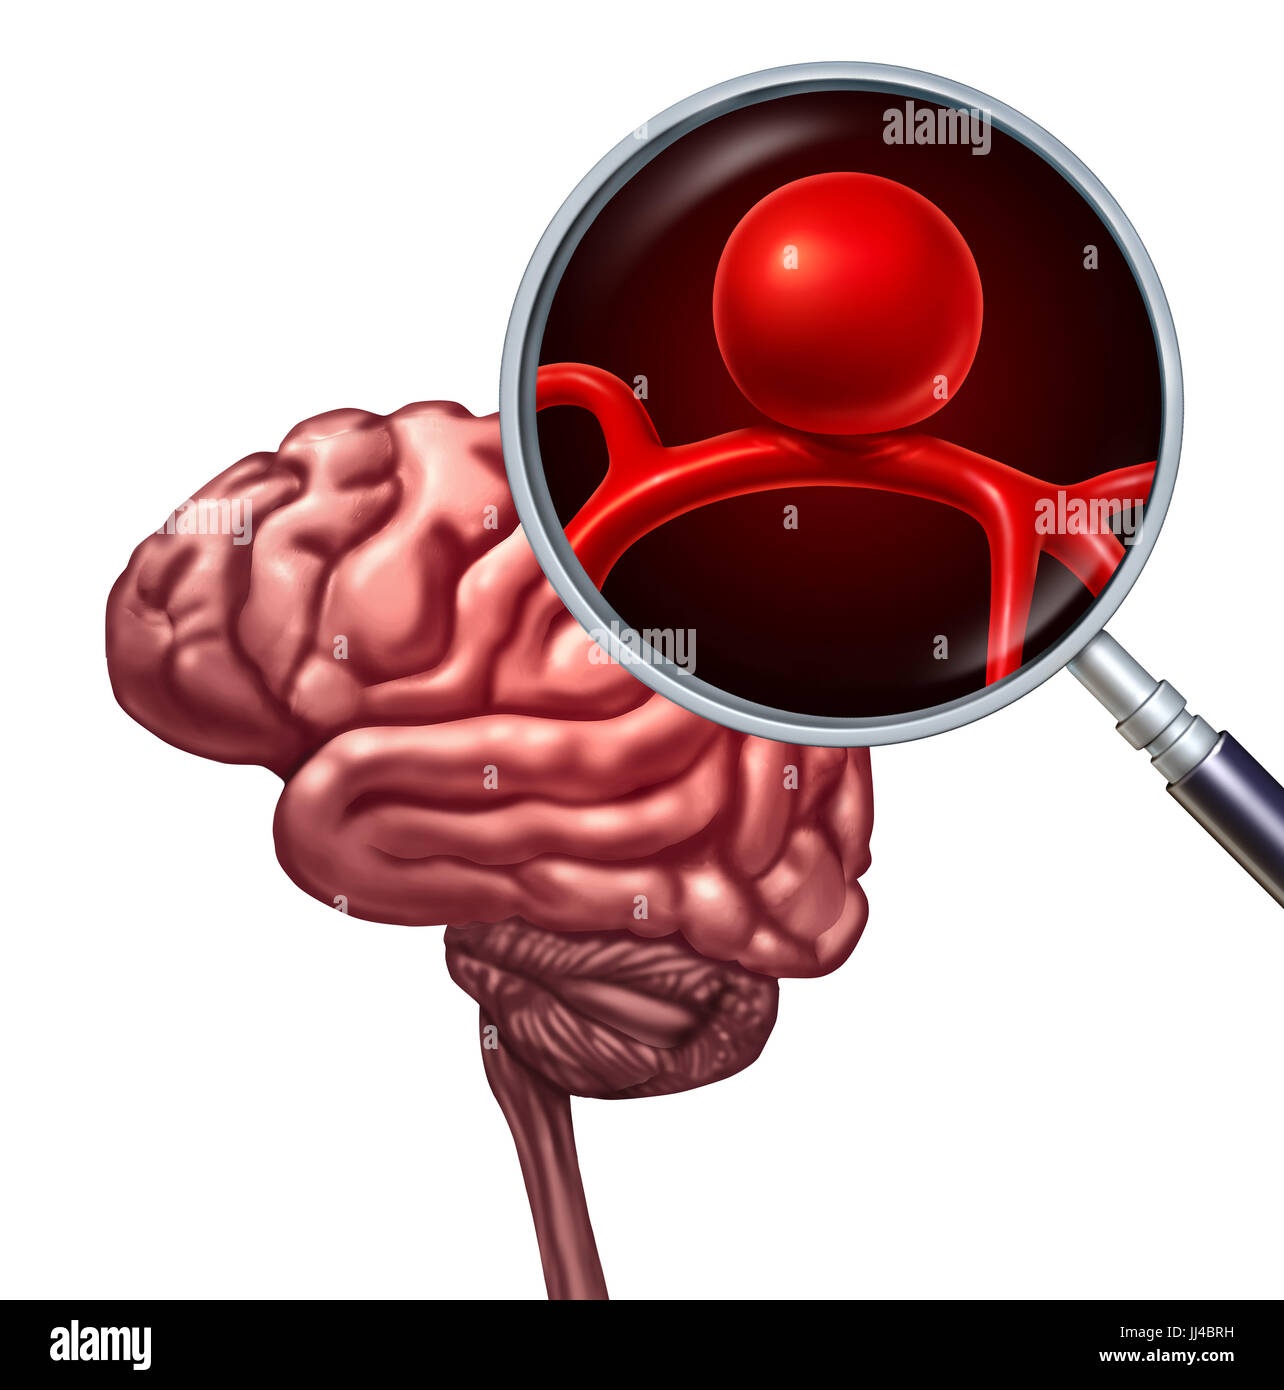 Brain aneurysm or cerebral aneurysms medical disorder concept as a magnification of a human thinking organ with a blood vessel. Stock Photo